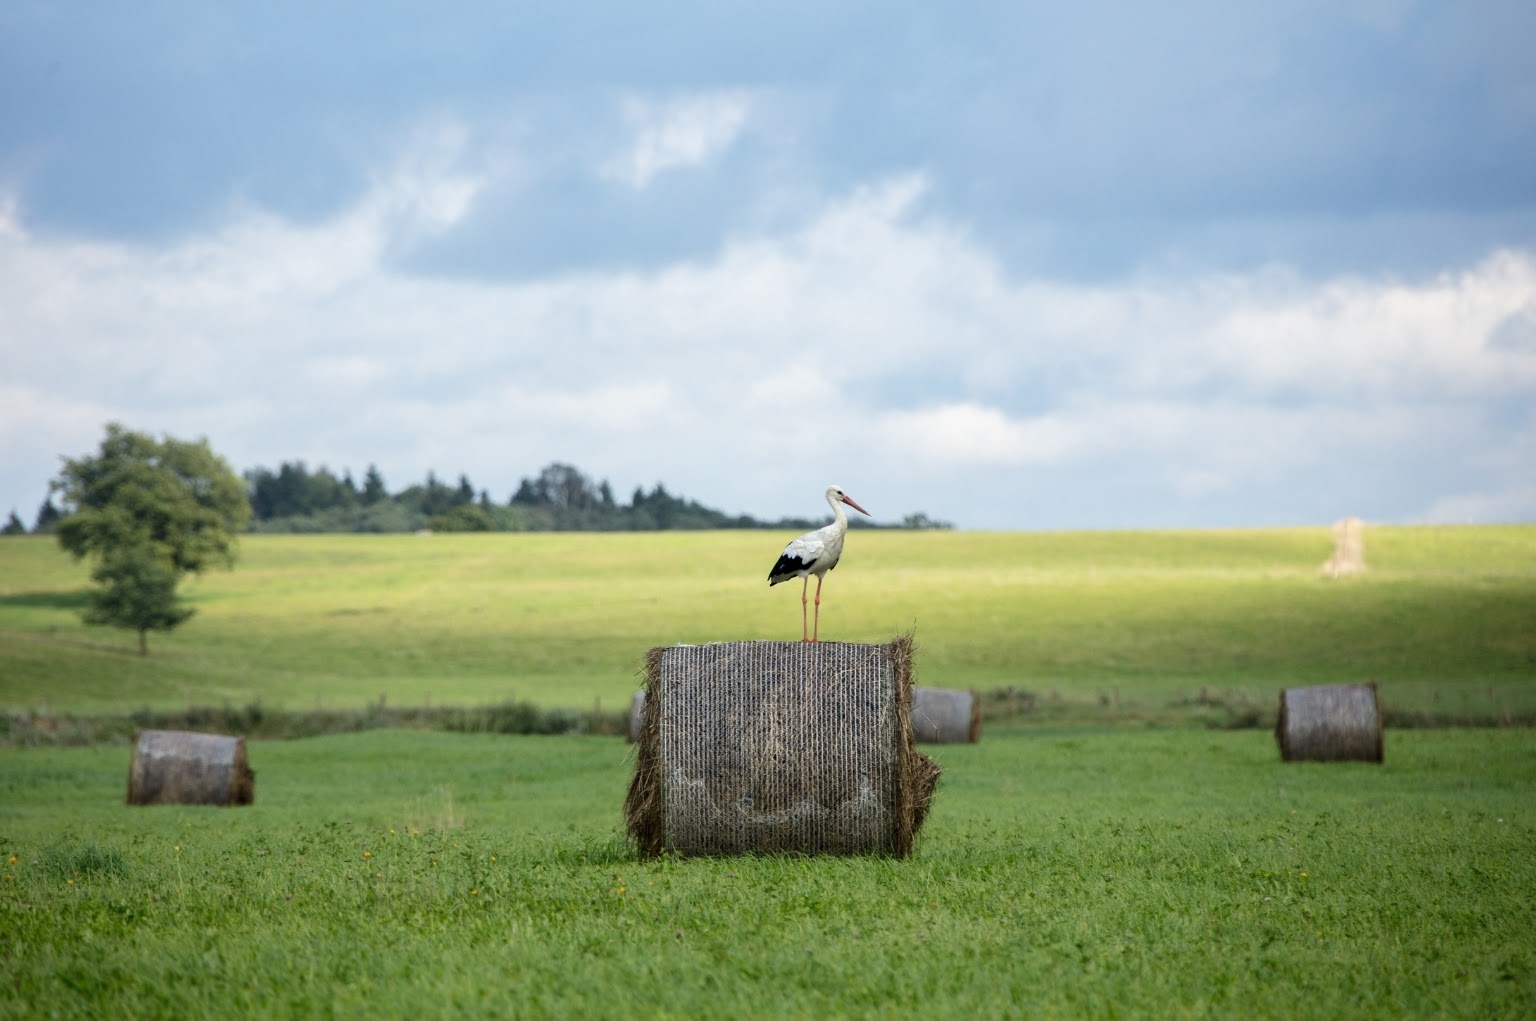 A stork in Lithuania